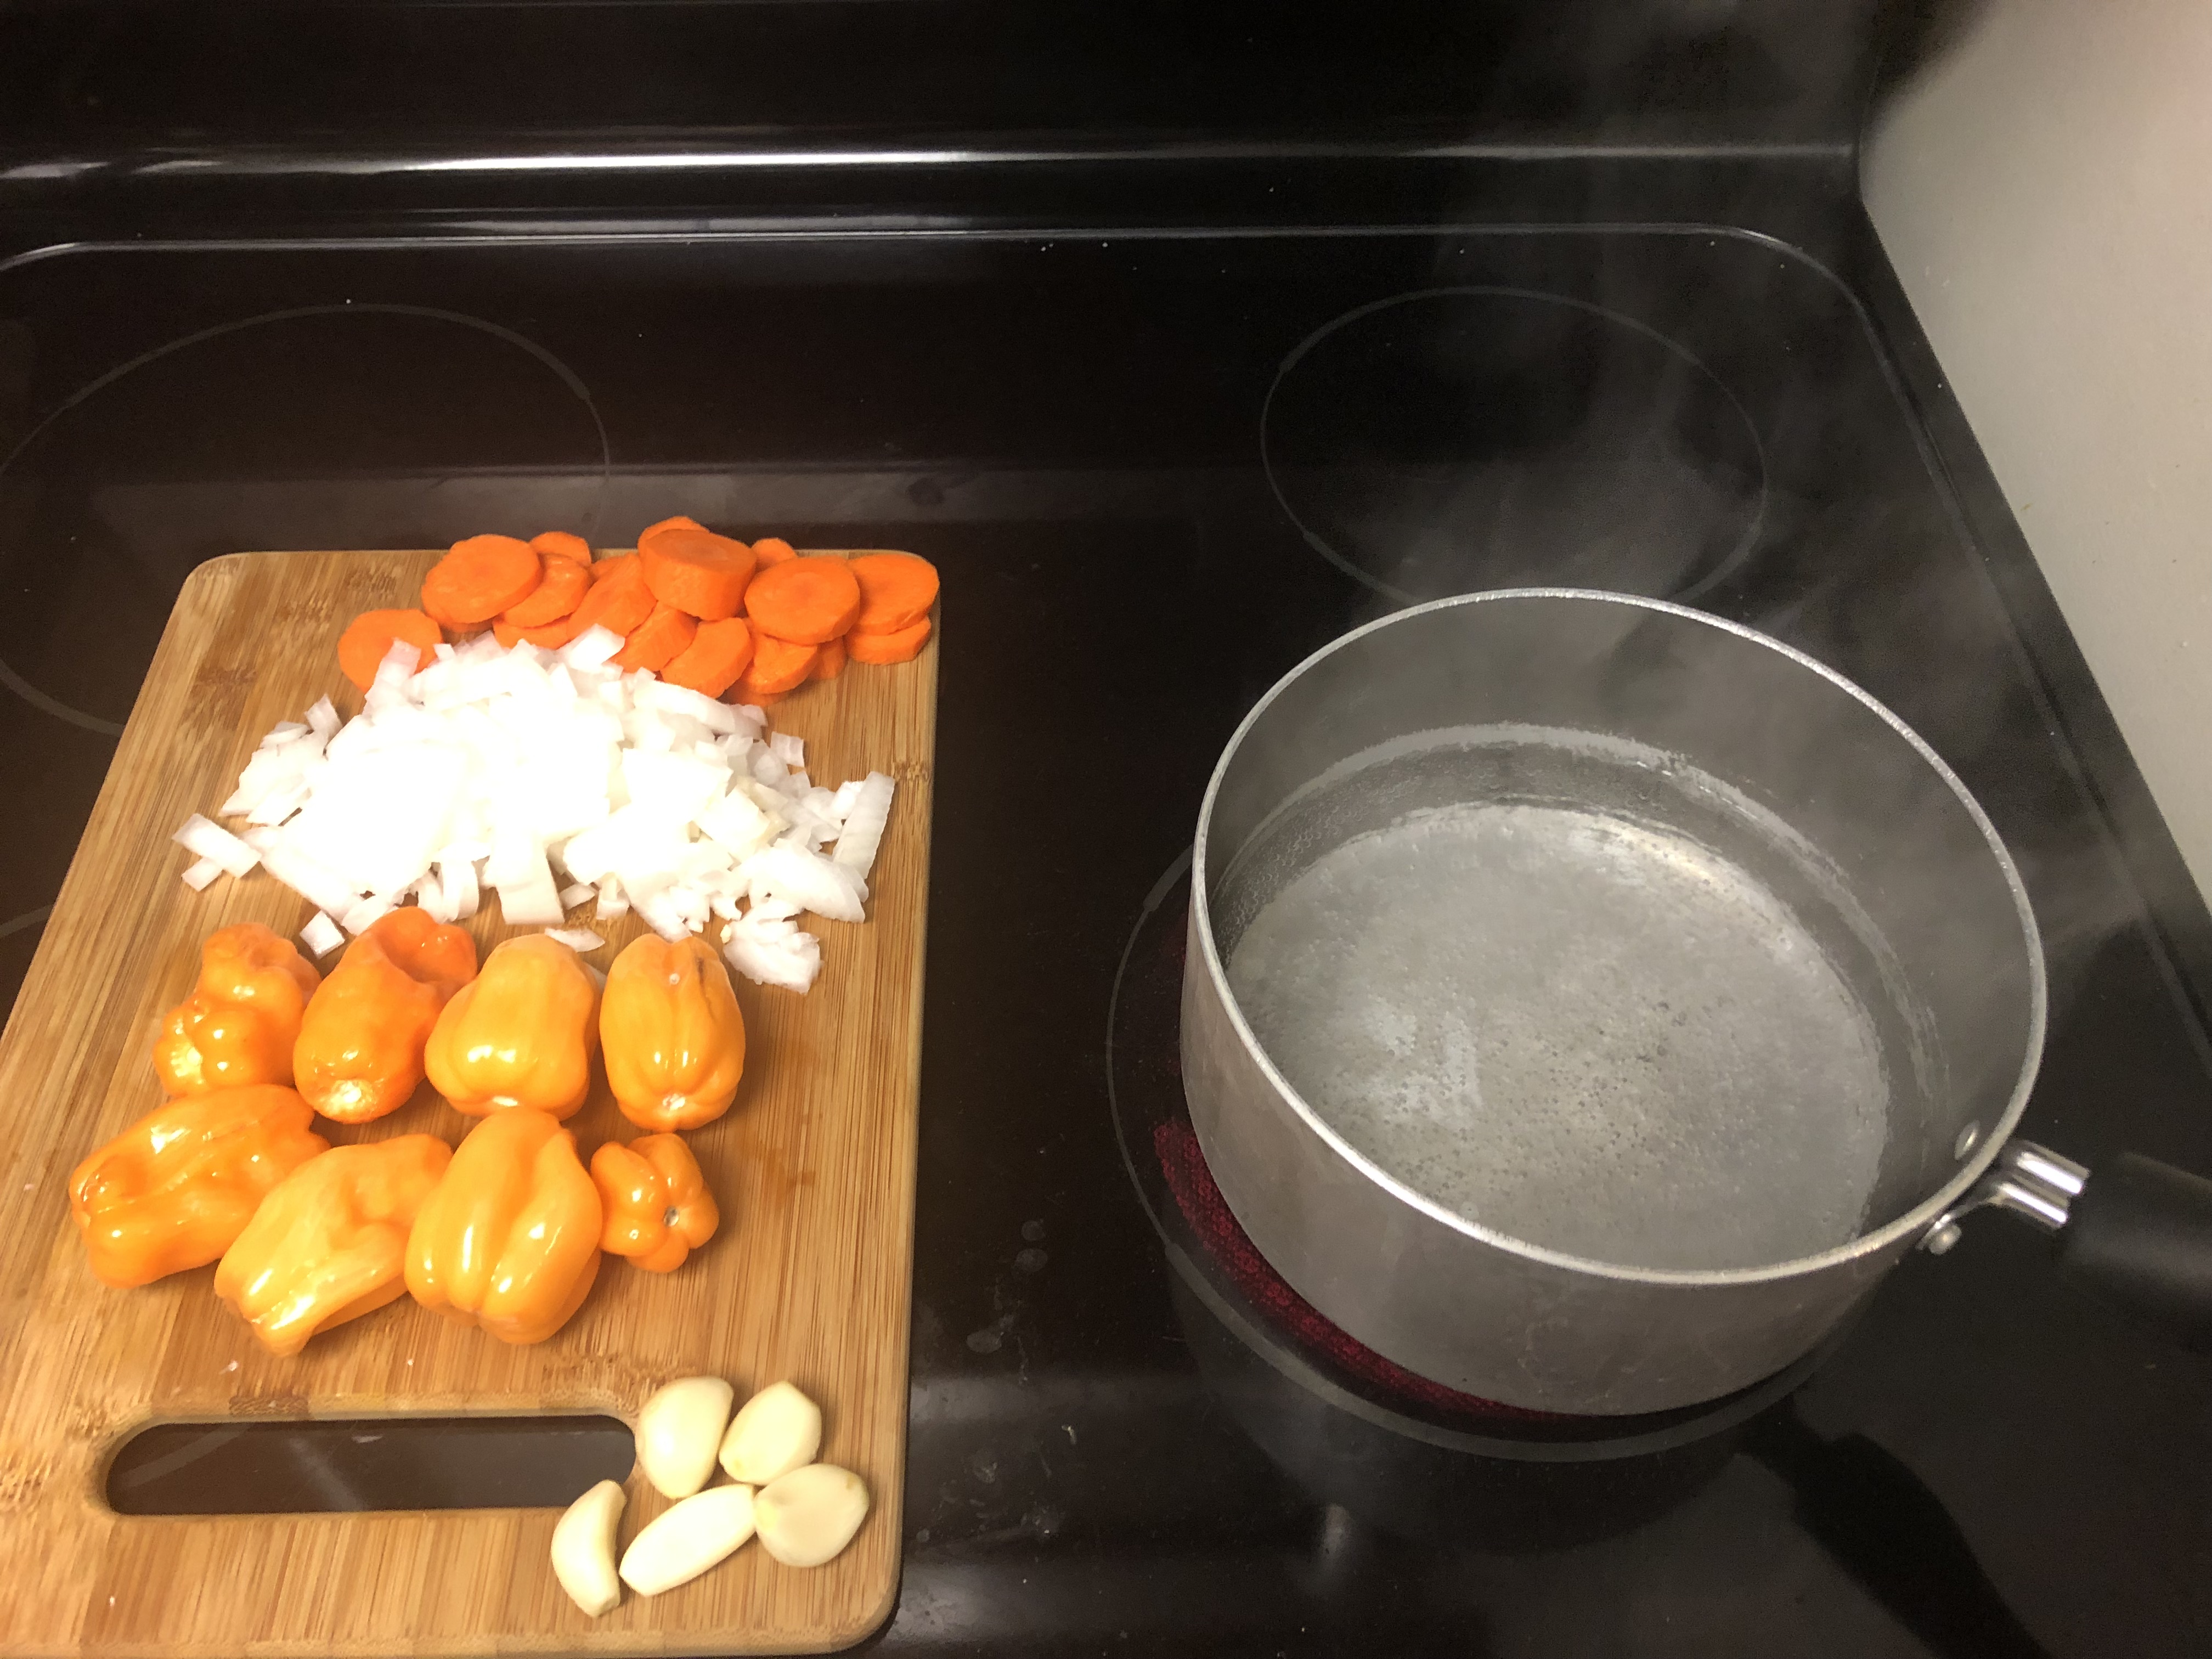 Prepped ingredients on cutting board next to pot of boiling water